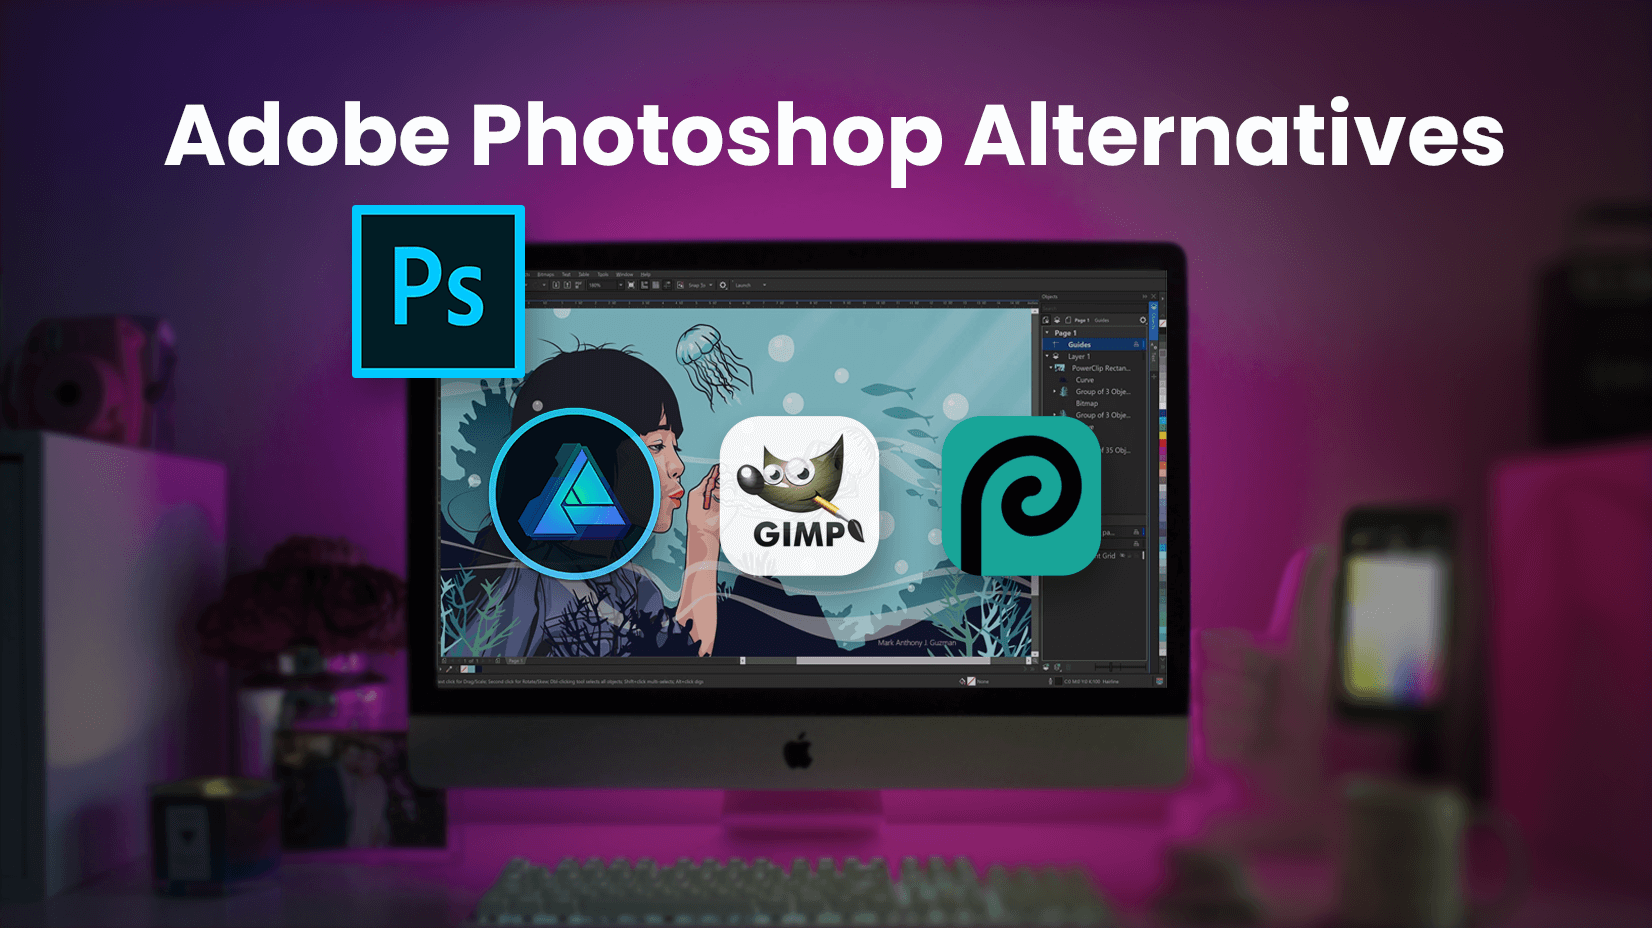 Ultravnc linux alternative to photoshop set roles and access permissions in splashtop